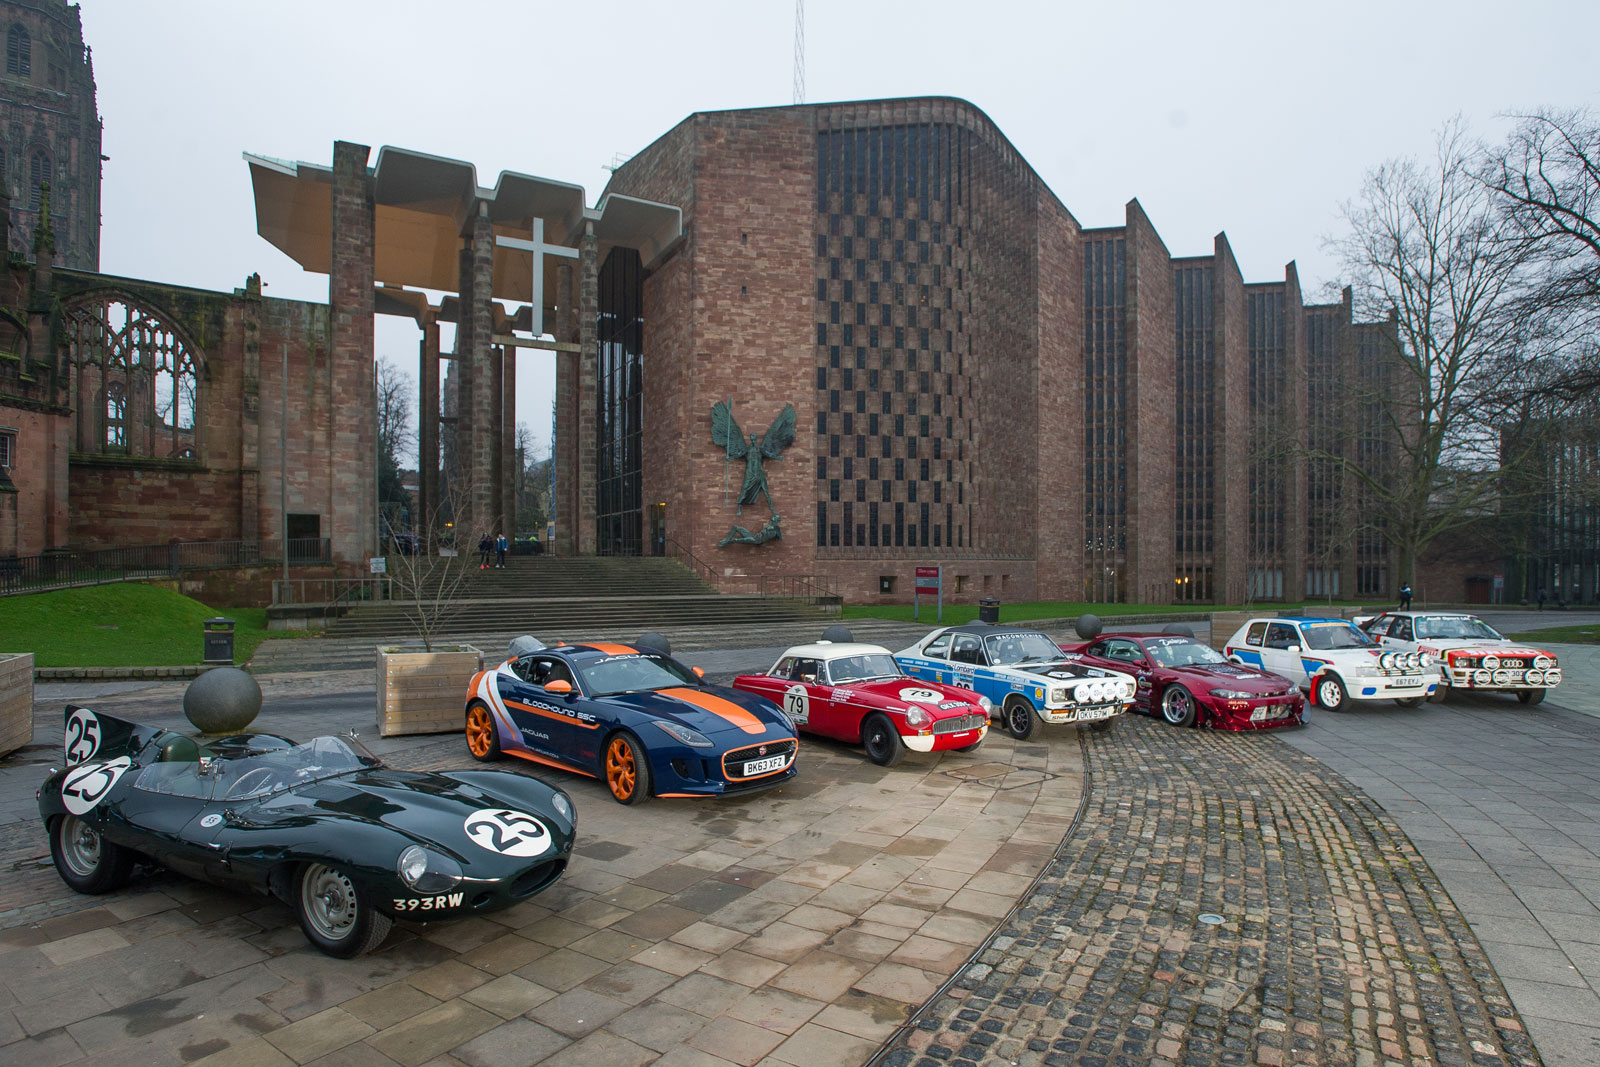 Motofest Coventry to host UK’s first city centre motorsport event since 1990 Autocar